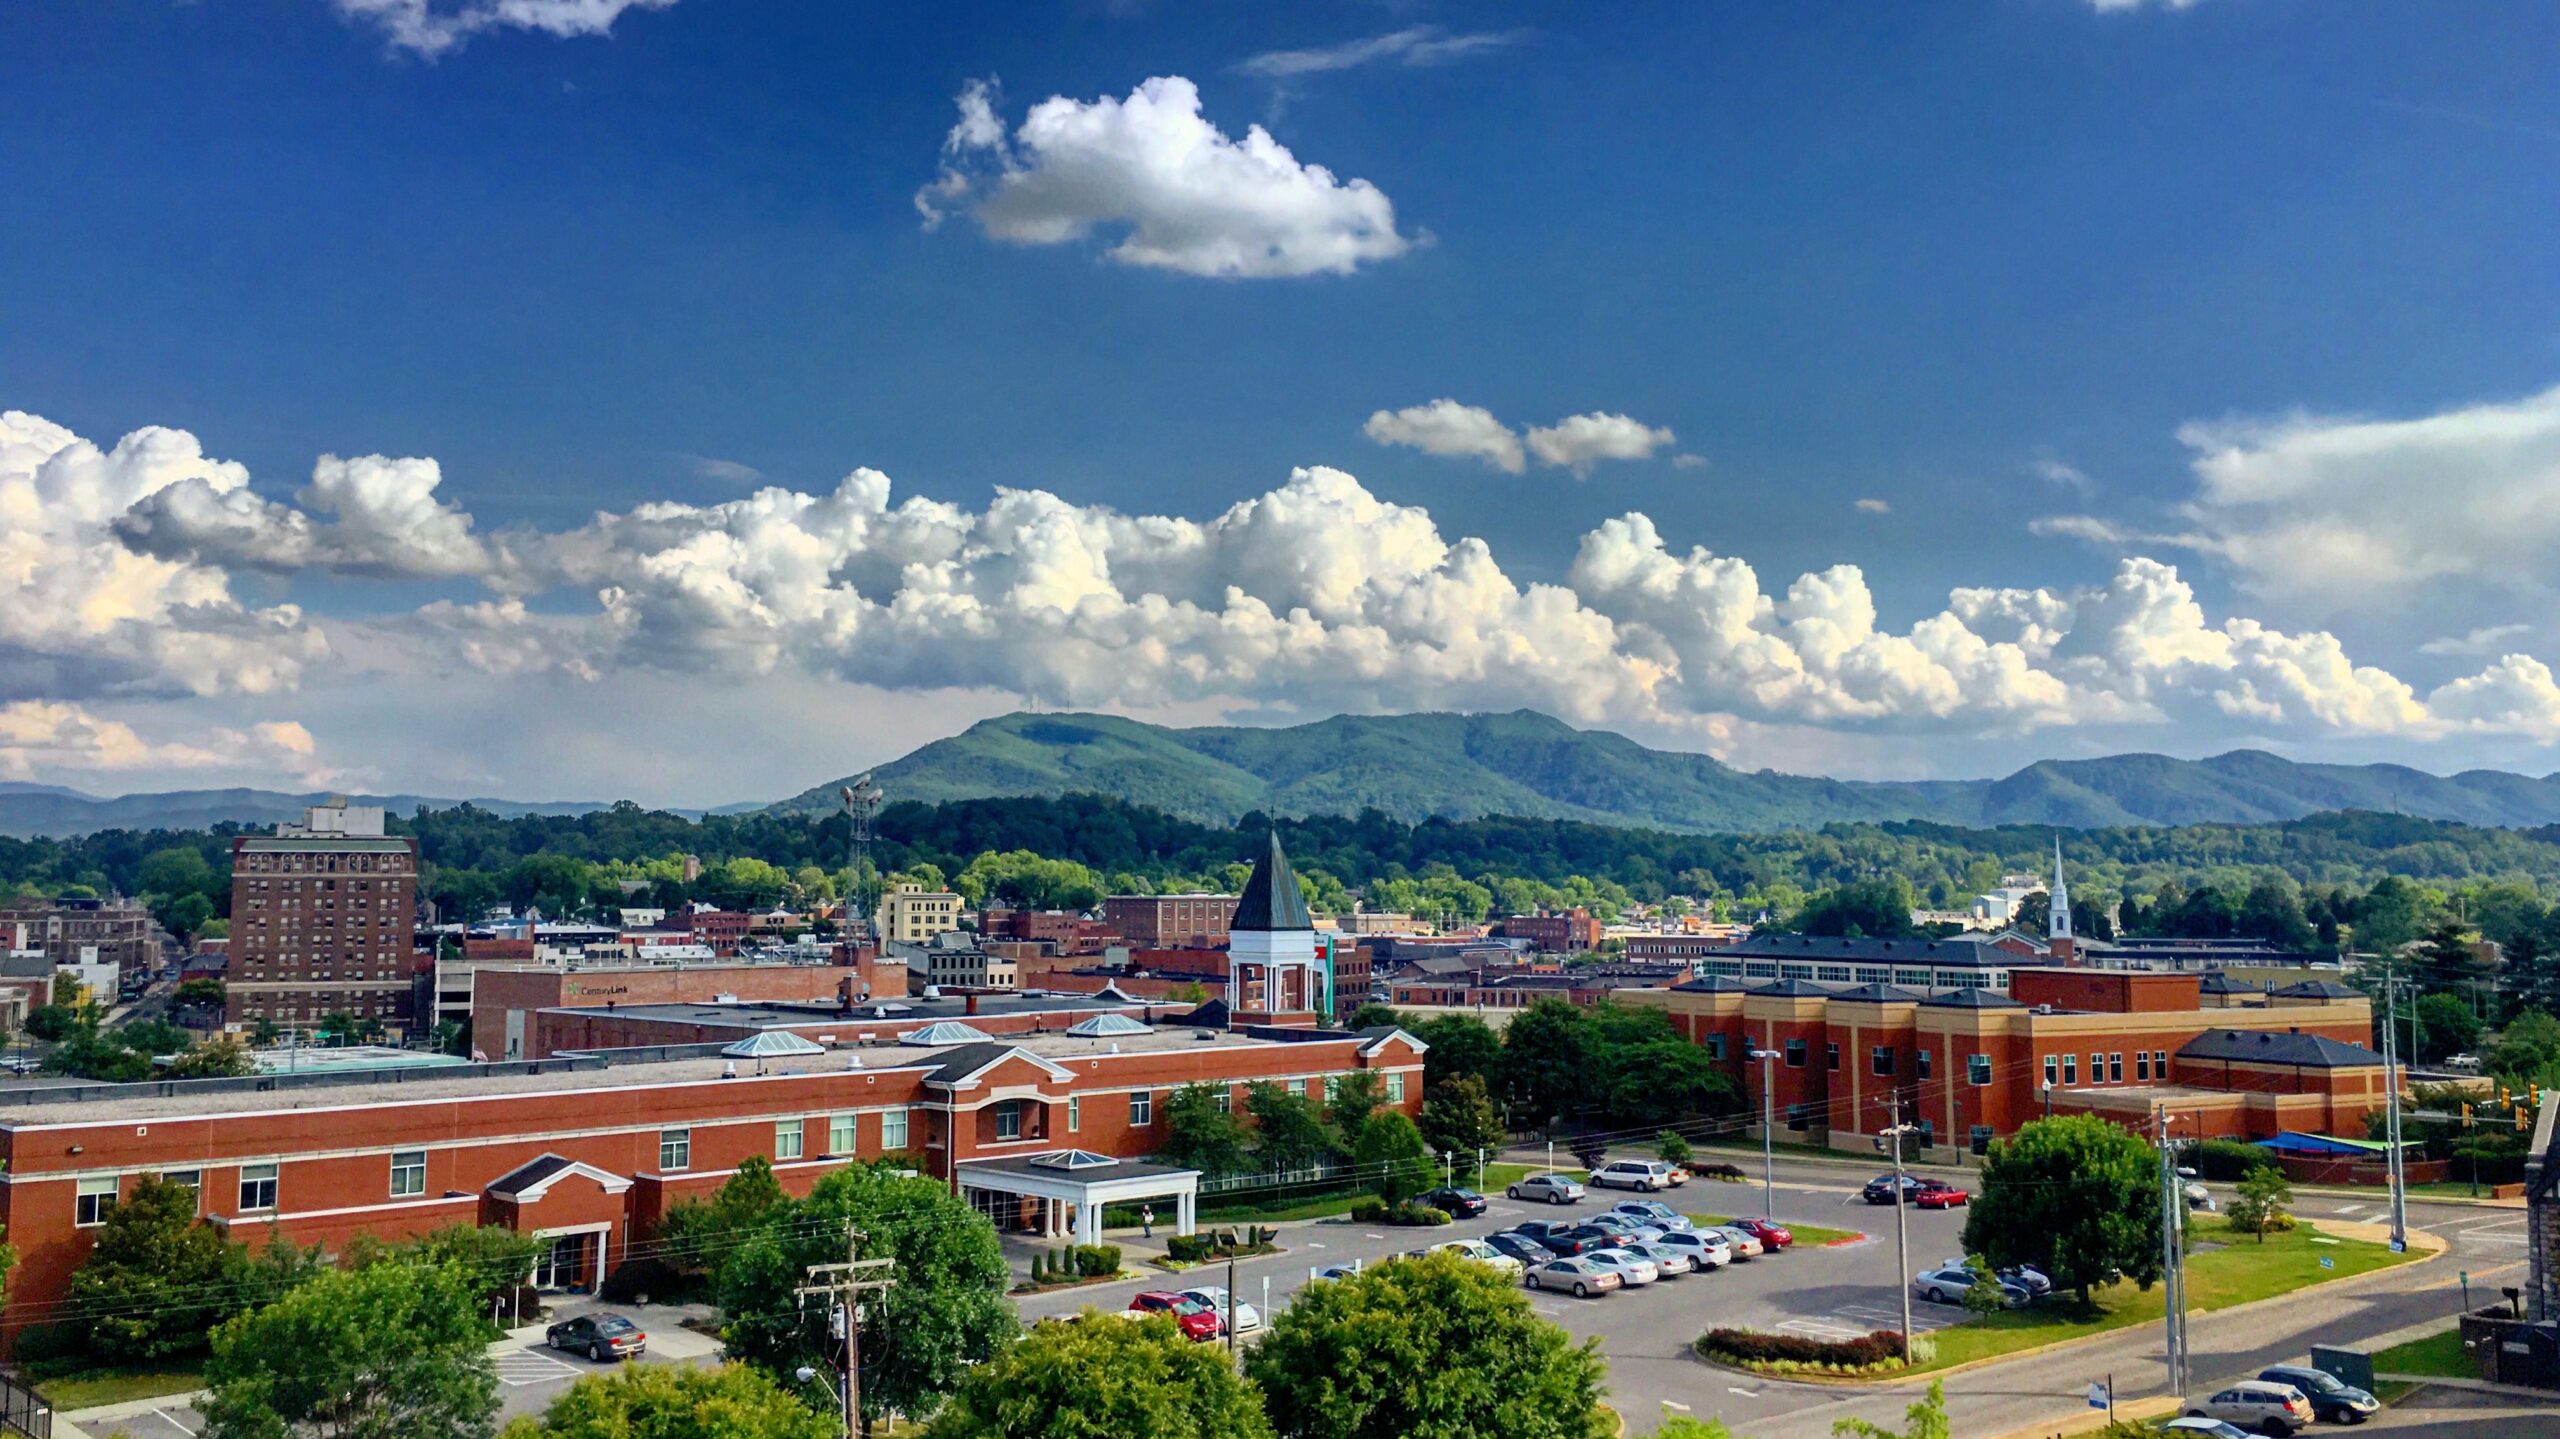 Johnson City backed by the Blue Ridge Mountains.
